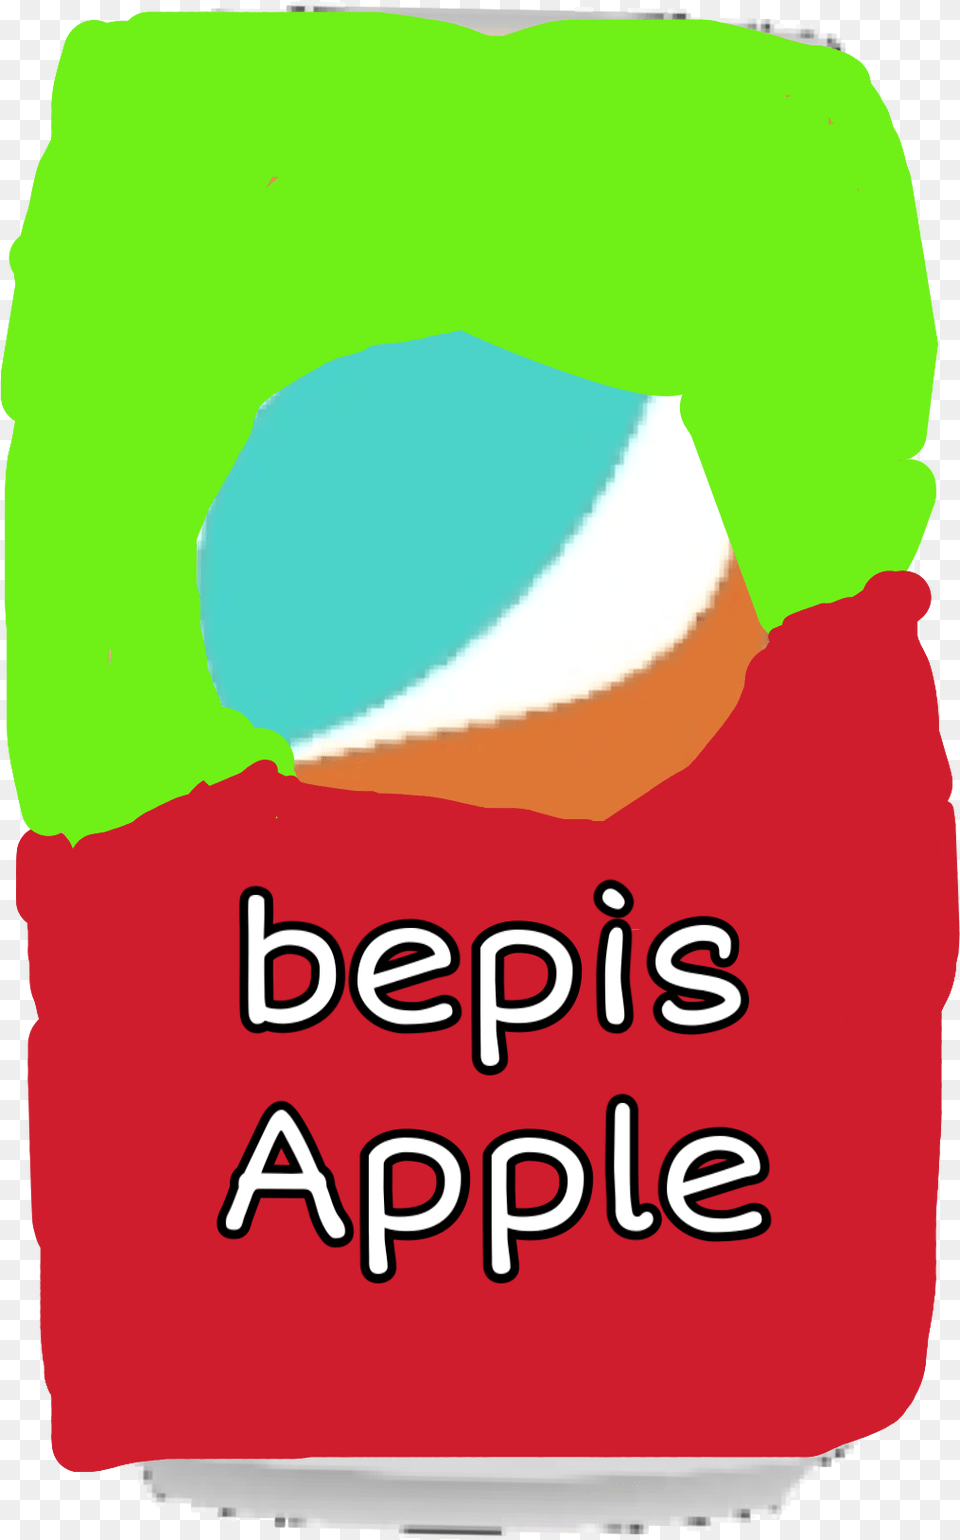 Wanna Bepis Apple Illustration, Baby, Person, Cream, Dessert Png Image